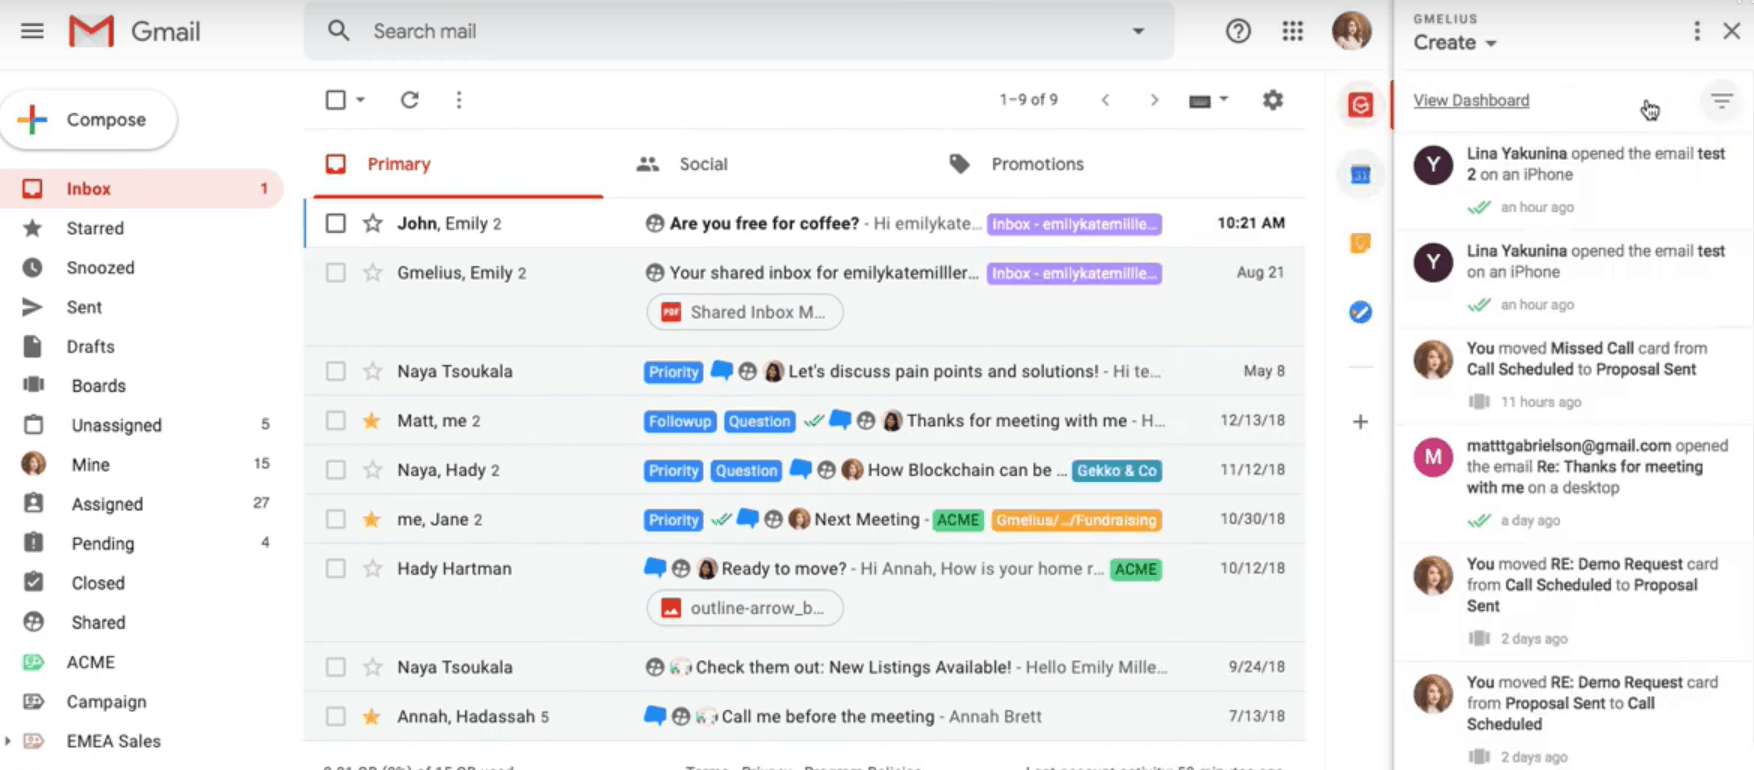 Gmelius's email interface